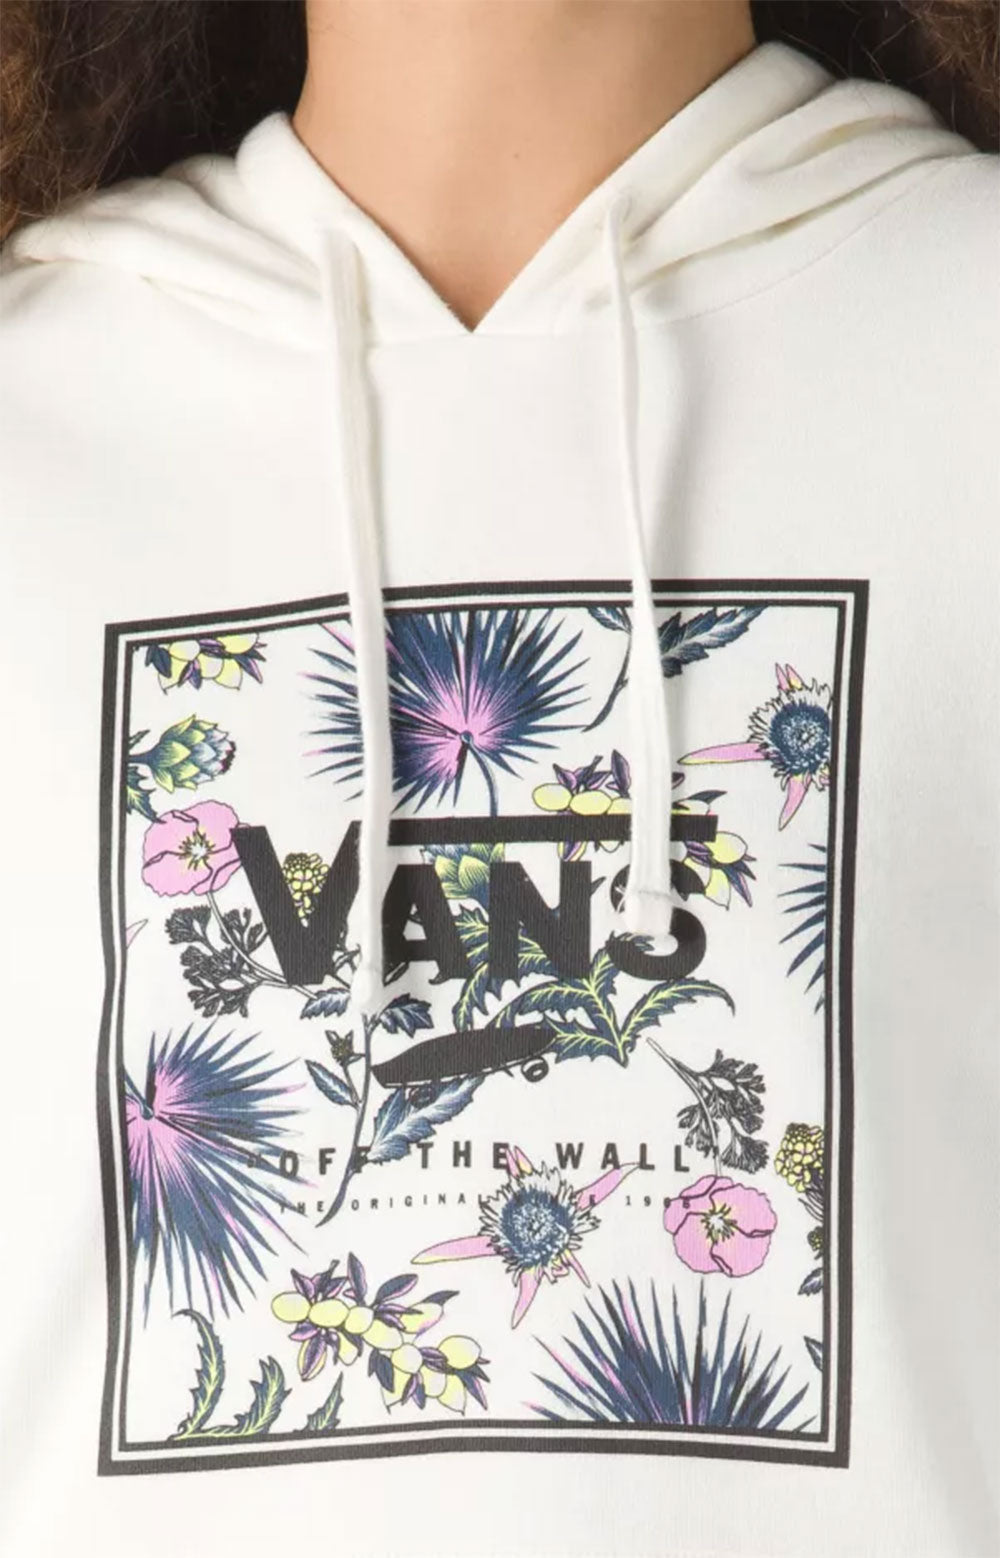 Califas Boxed In Pullover Hoodie - Marshmallow